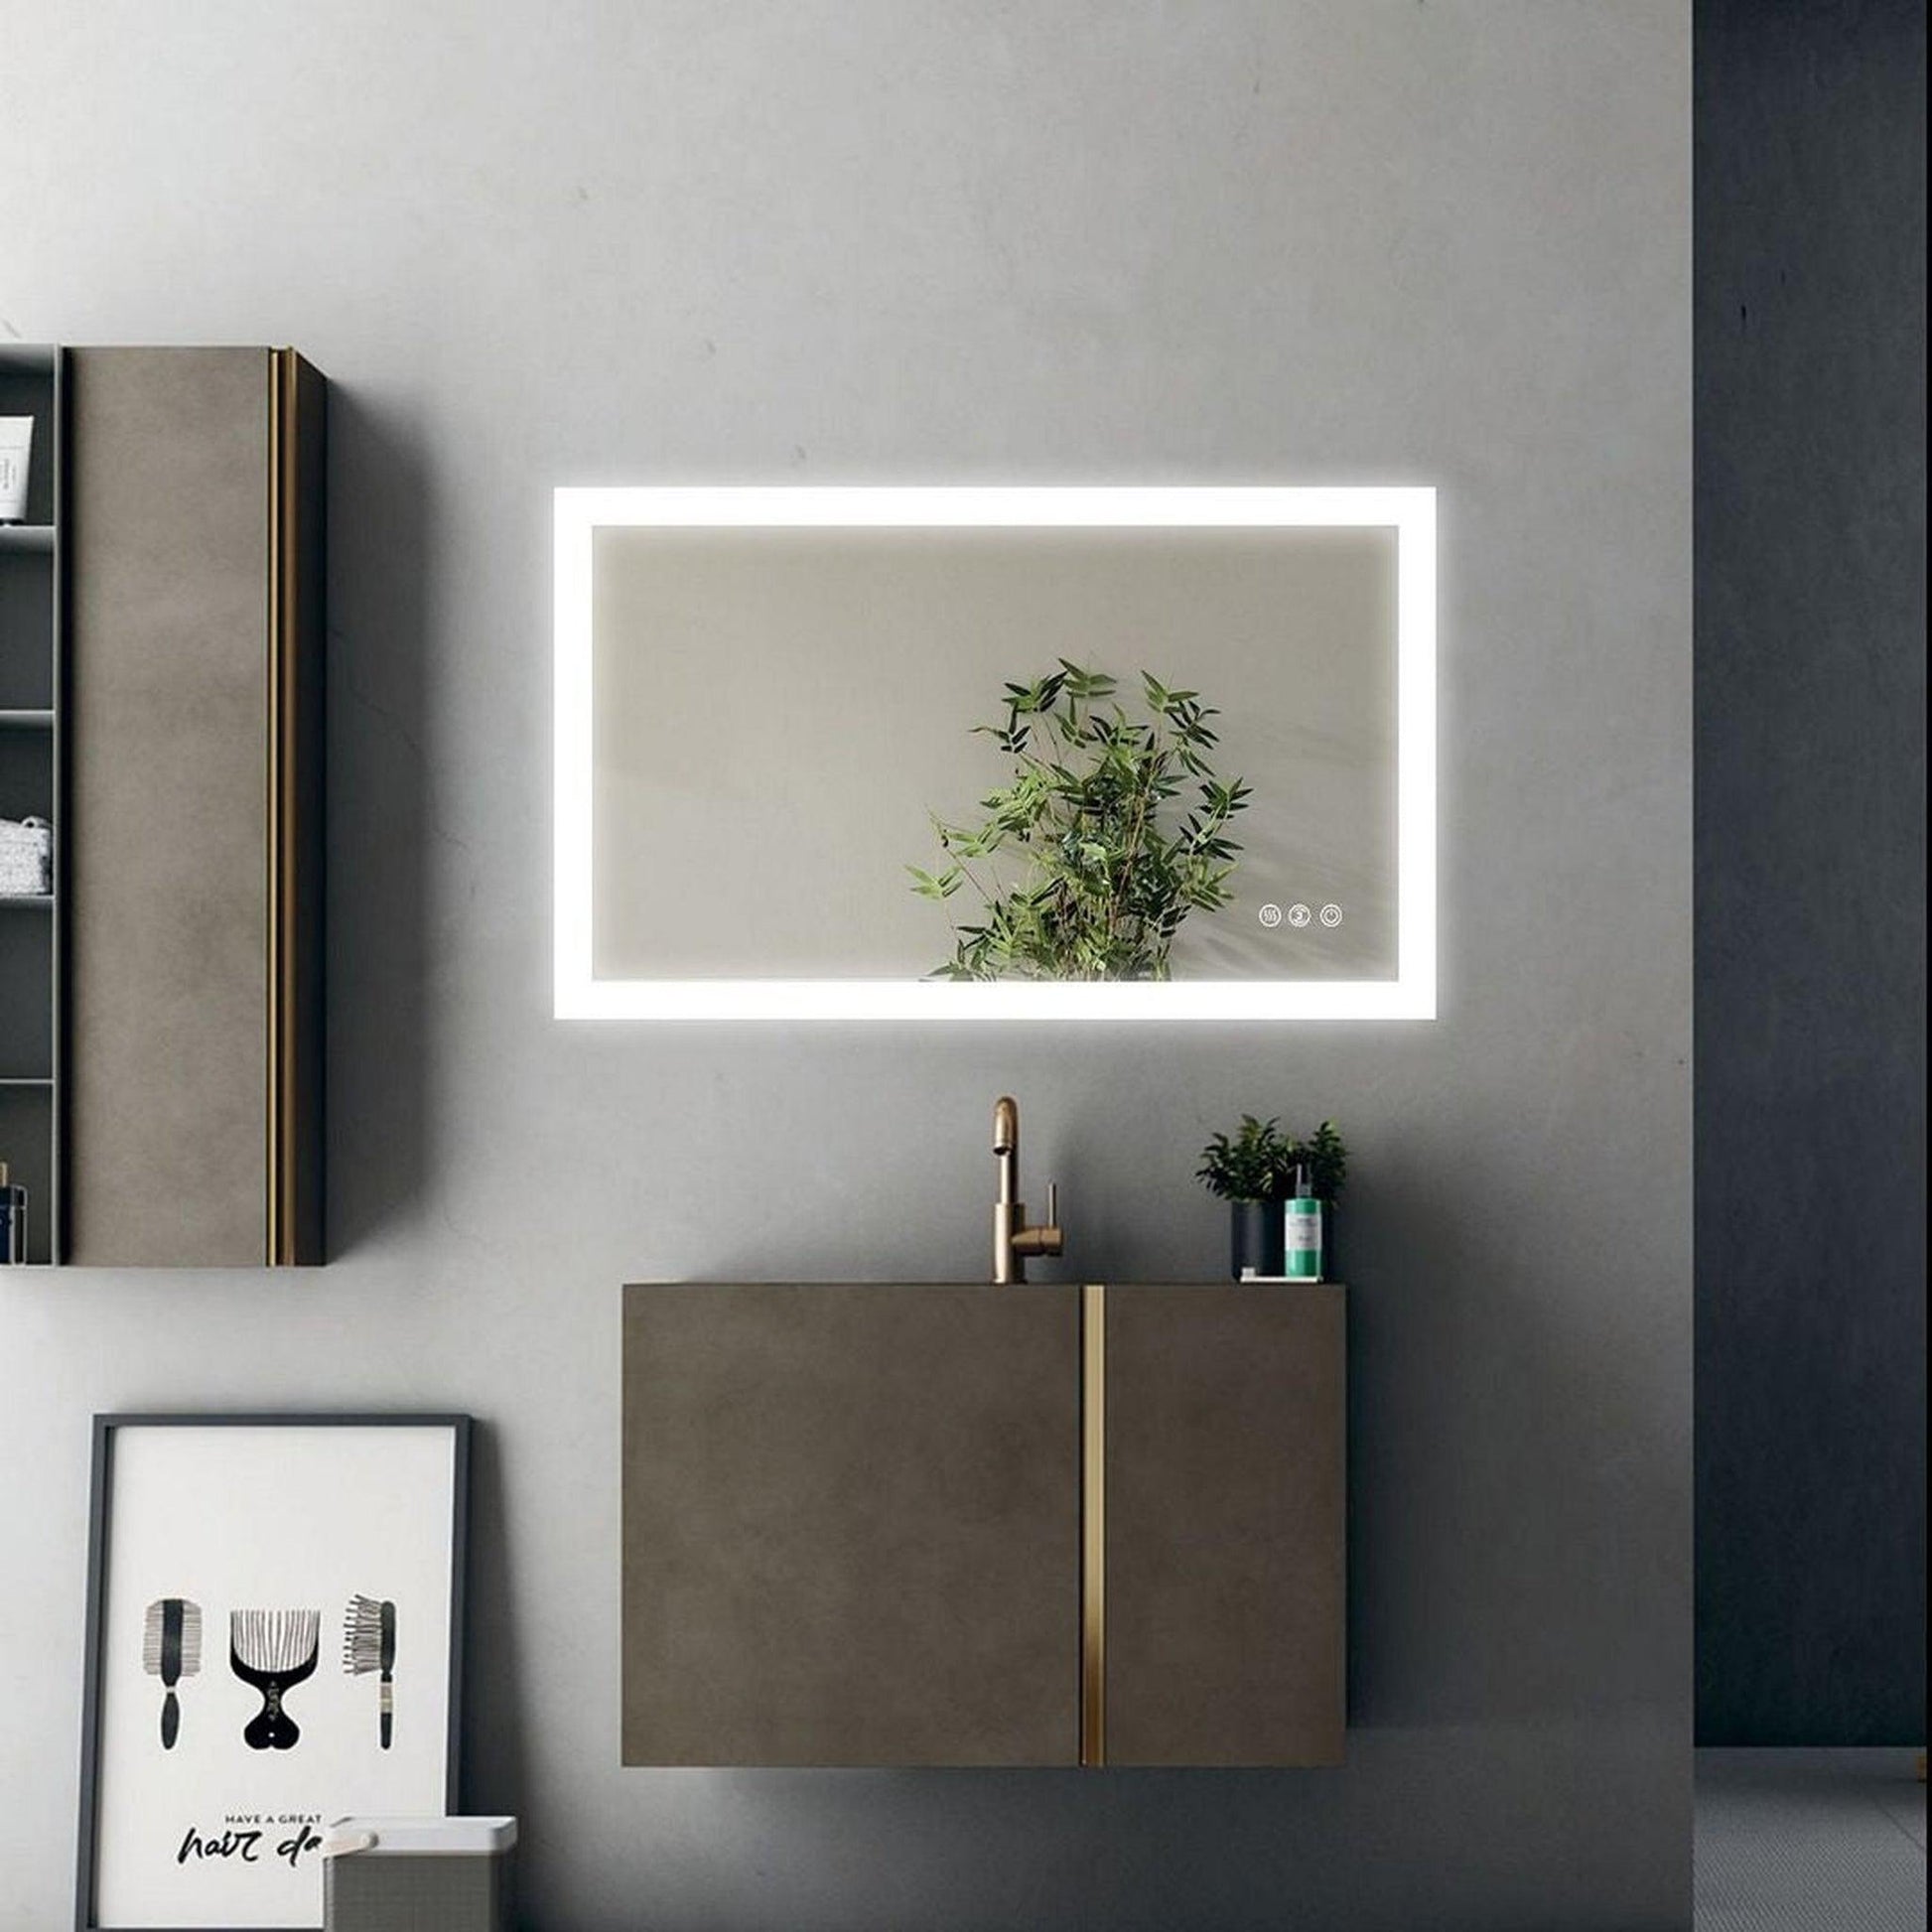 ExBrite Second Generation 40" x 24" Frameless LED Backlit Super Slim Bathroom Vanity Mirror With Night Light, Anti Fog, Dimmer, Touch Button and Waterproof IP44